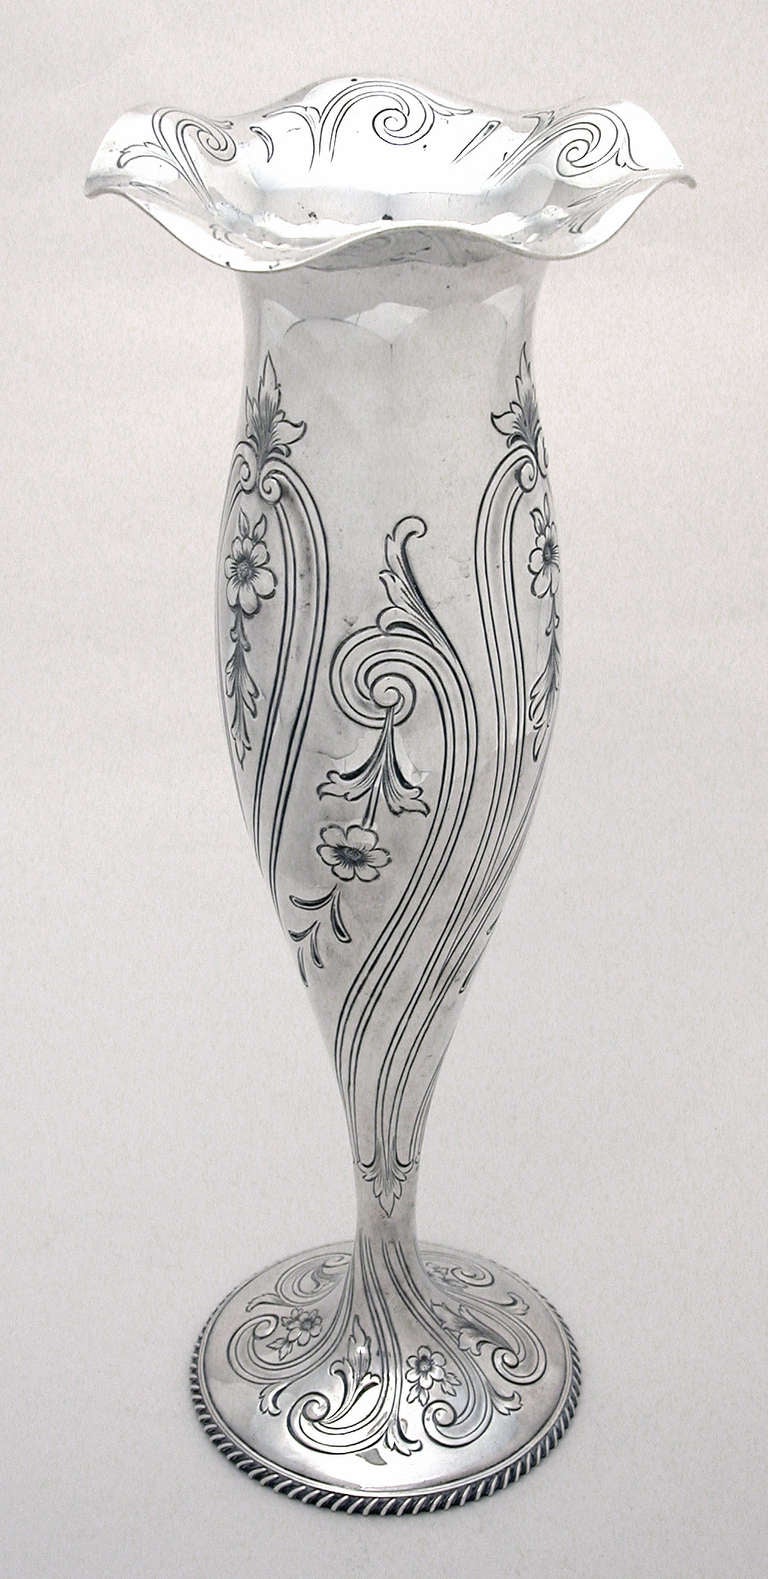 Etched sterling silver Art Nouveau vase by Shreve, San Francisco, Circa 1900.  16.50 in. high by 6 in. diameter.